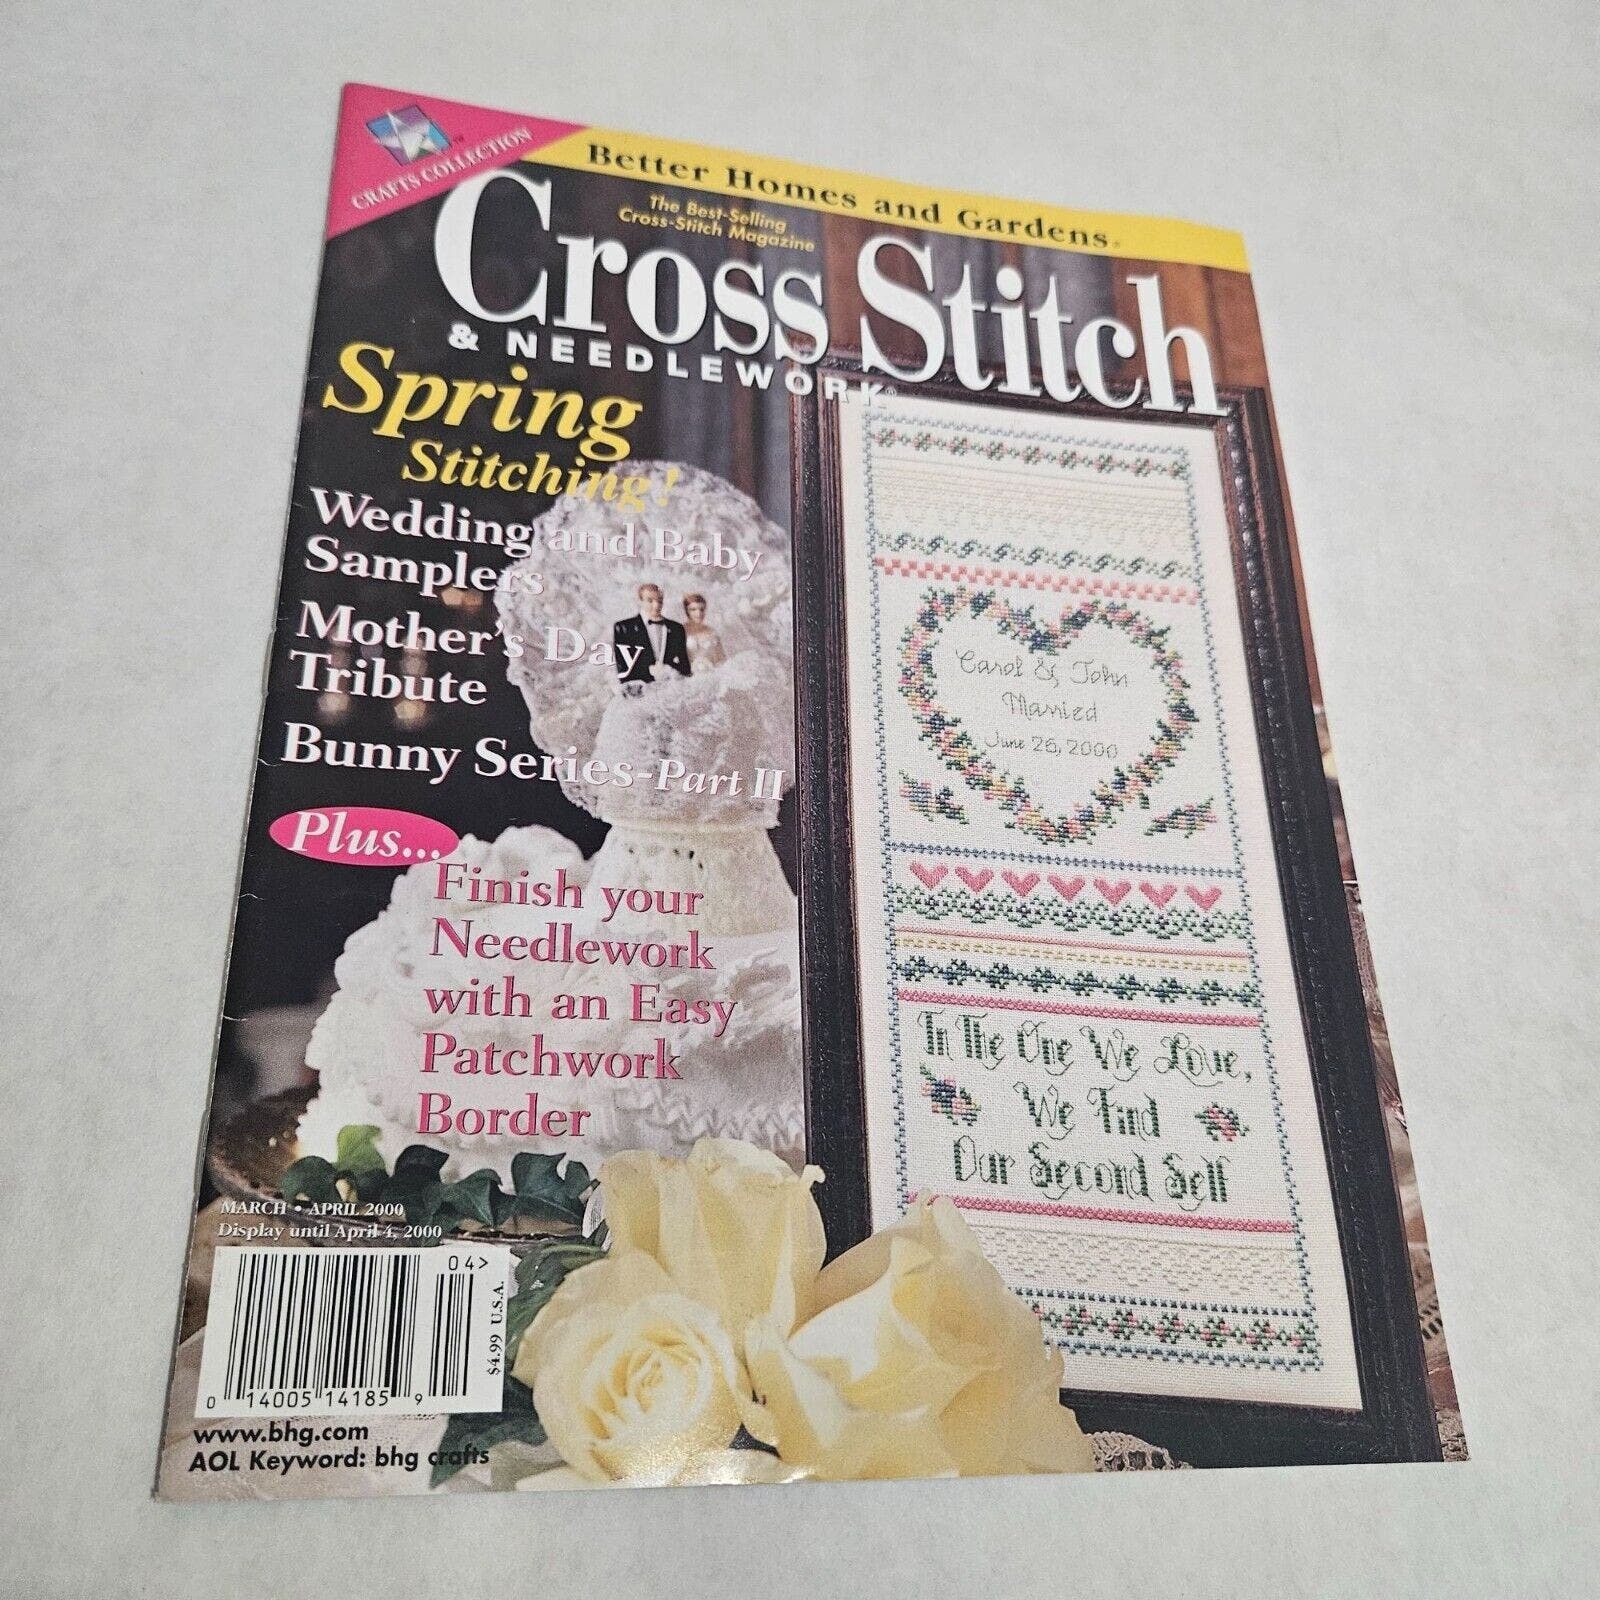 Cross Stitch & Needlework Better Homes and Gardens March April 2000 - $9.98